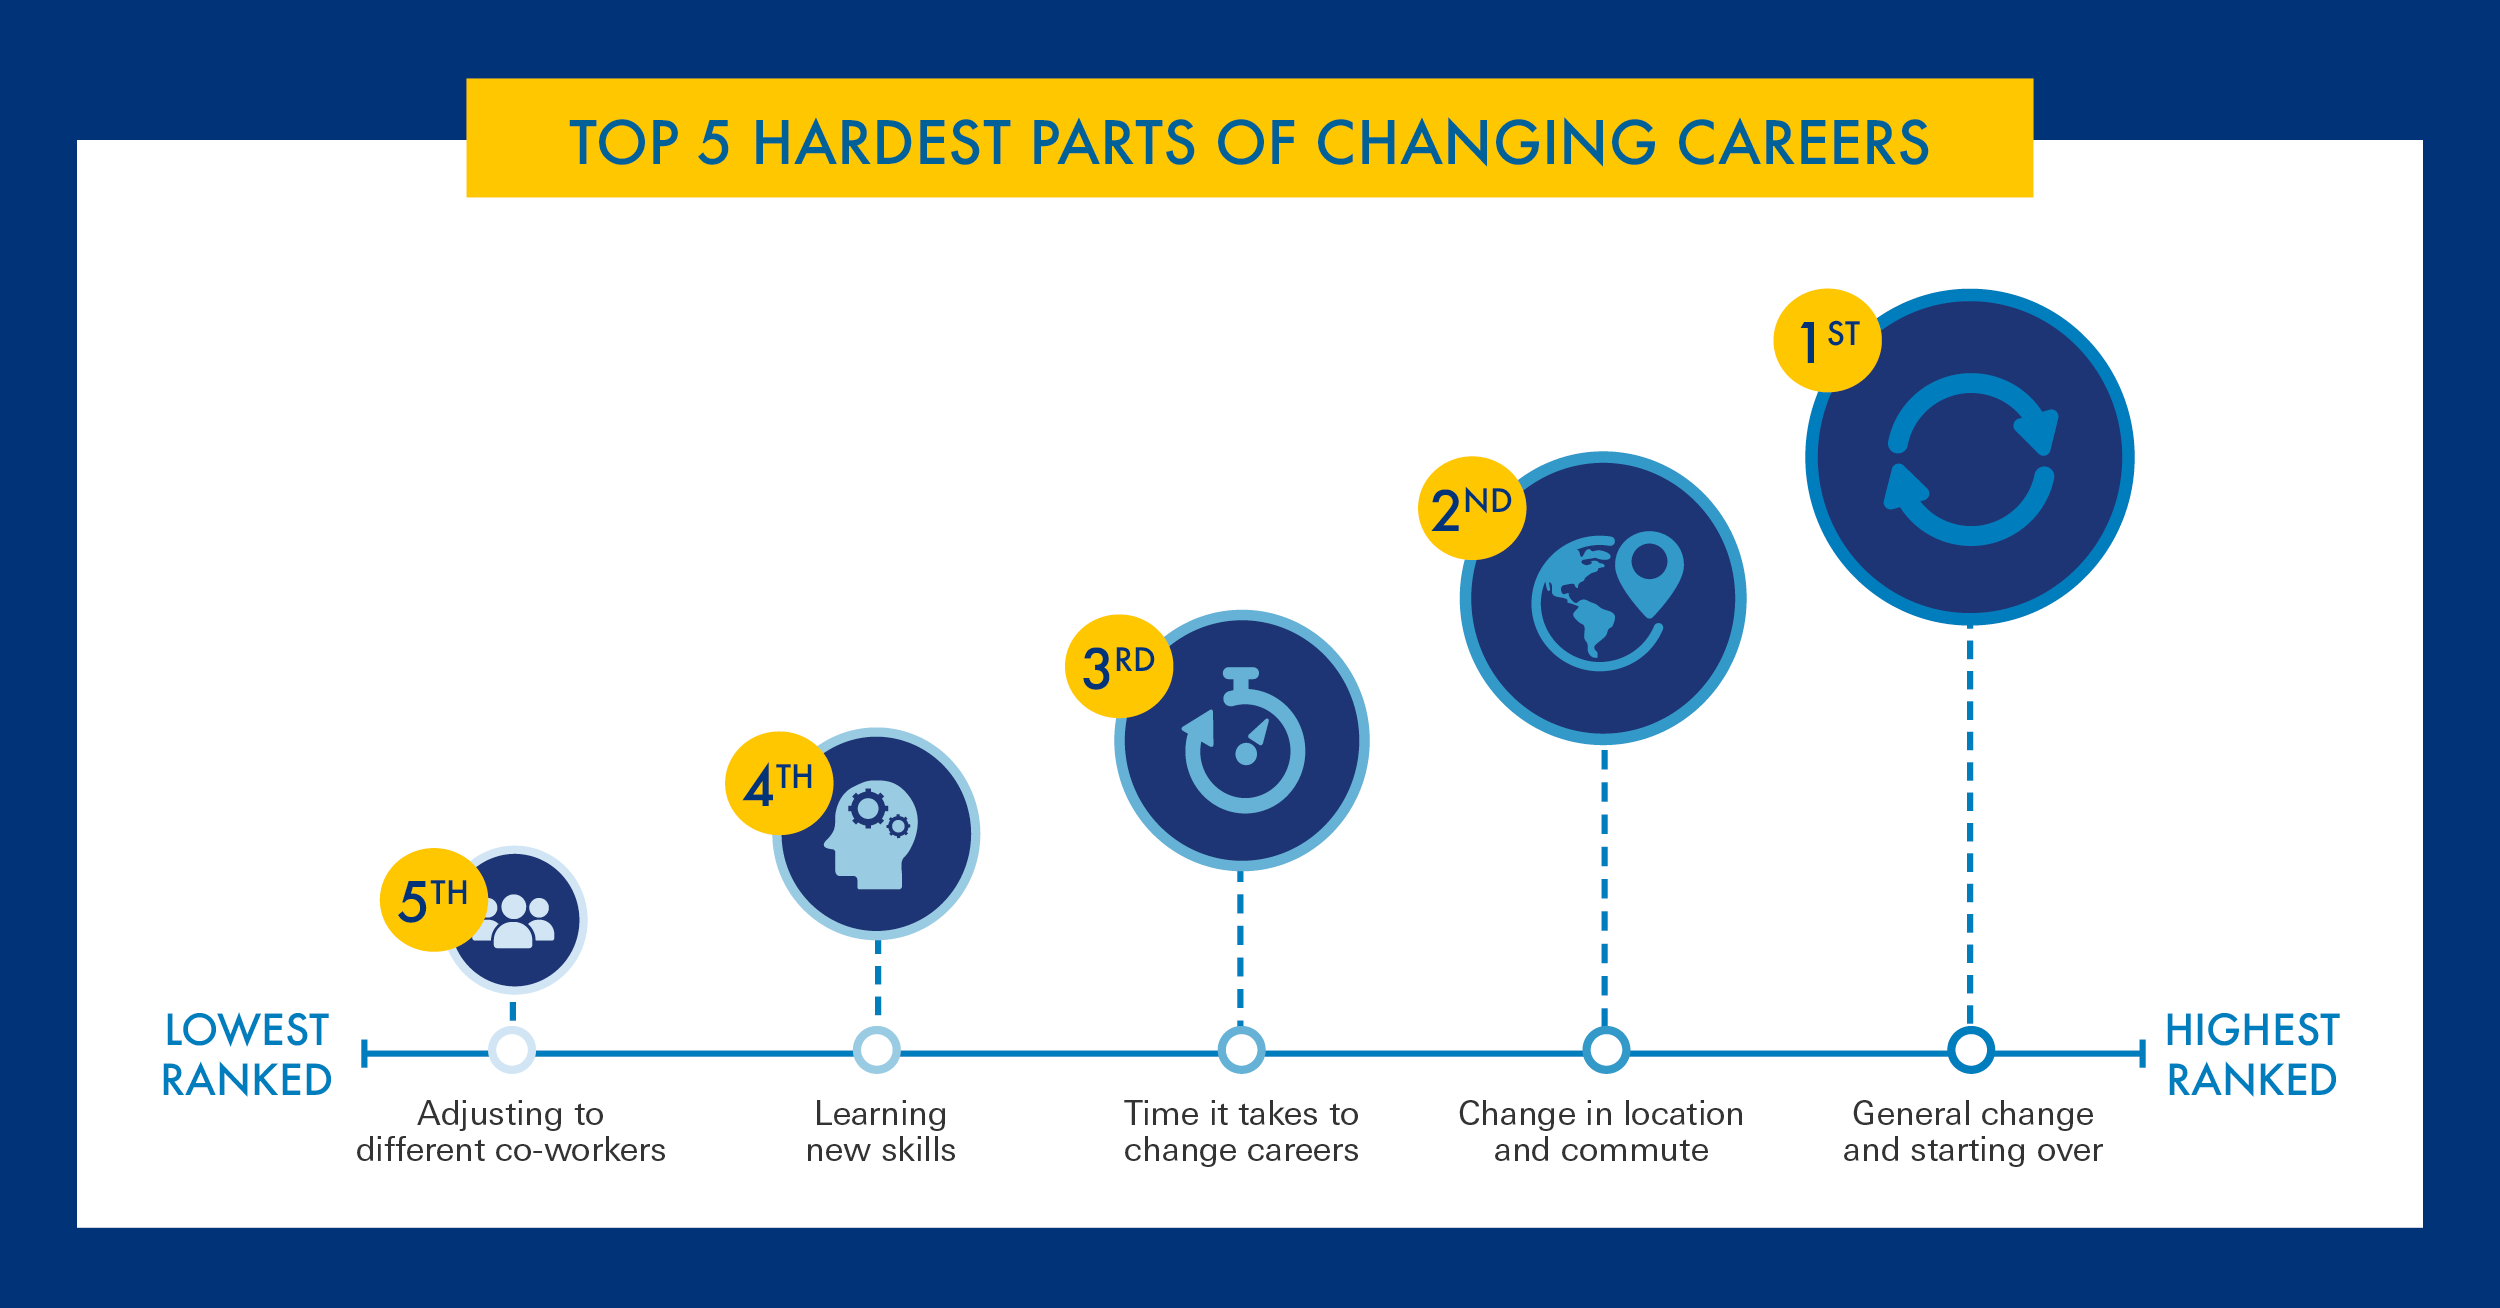 Top 5 hardest parts of changing careers